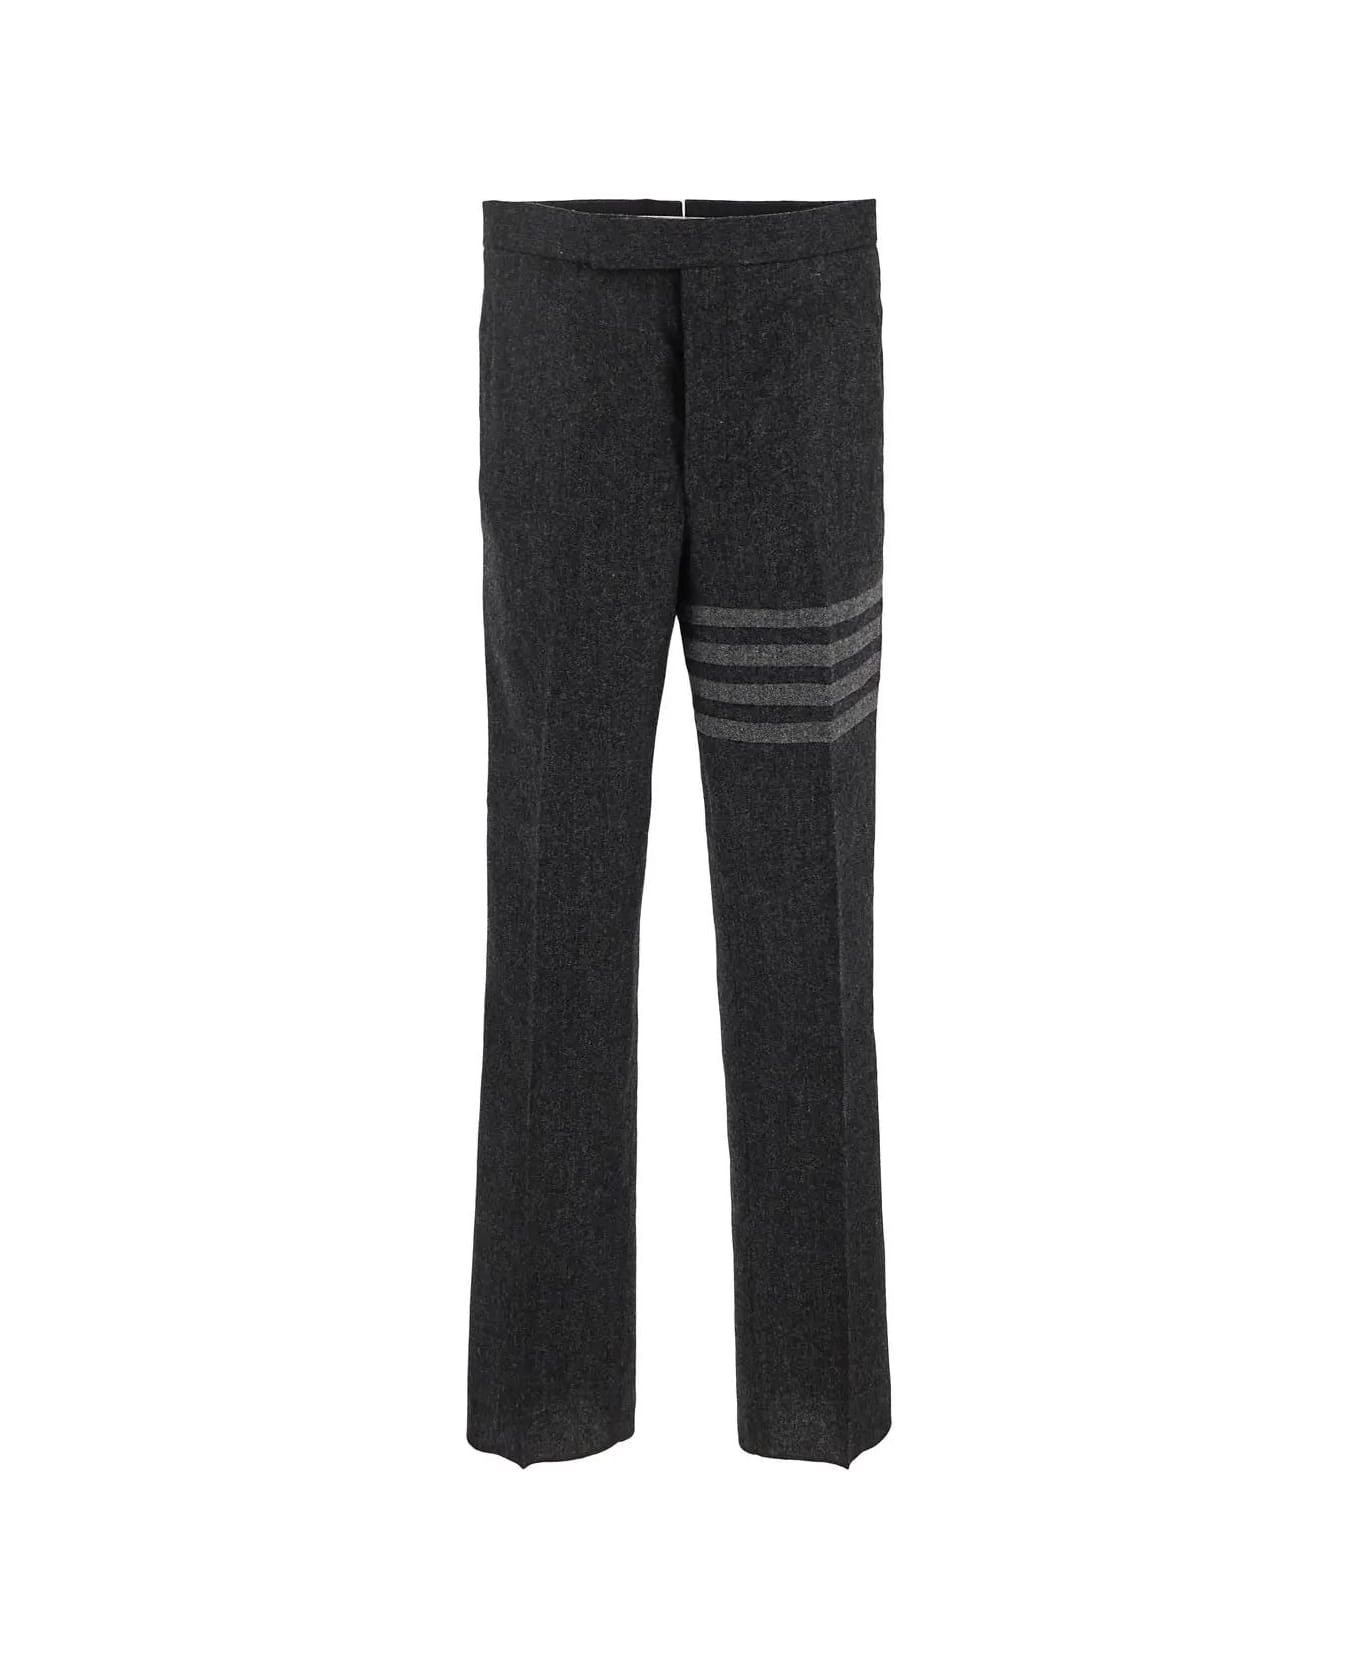 Thom Browne Low Rise Trousers - GREY ボトムス